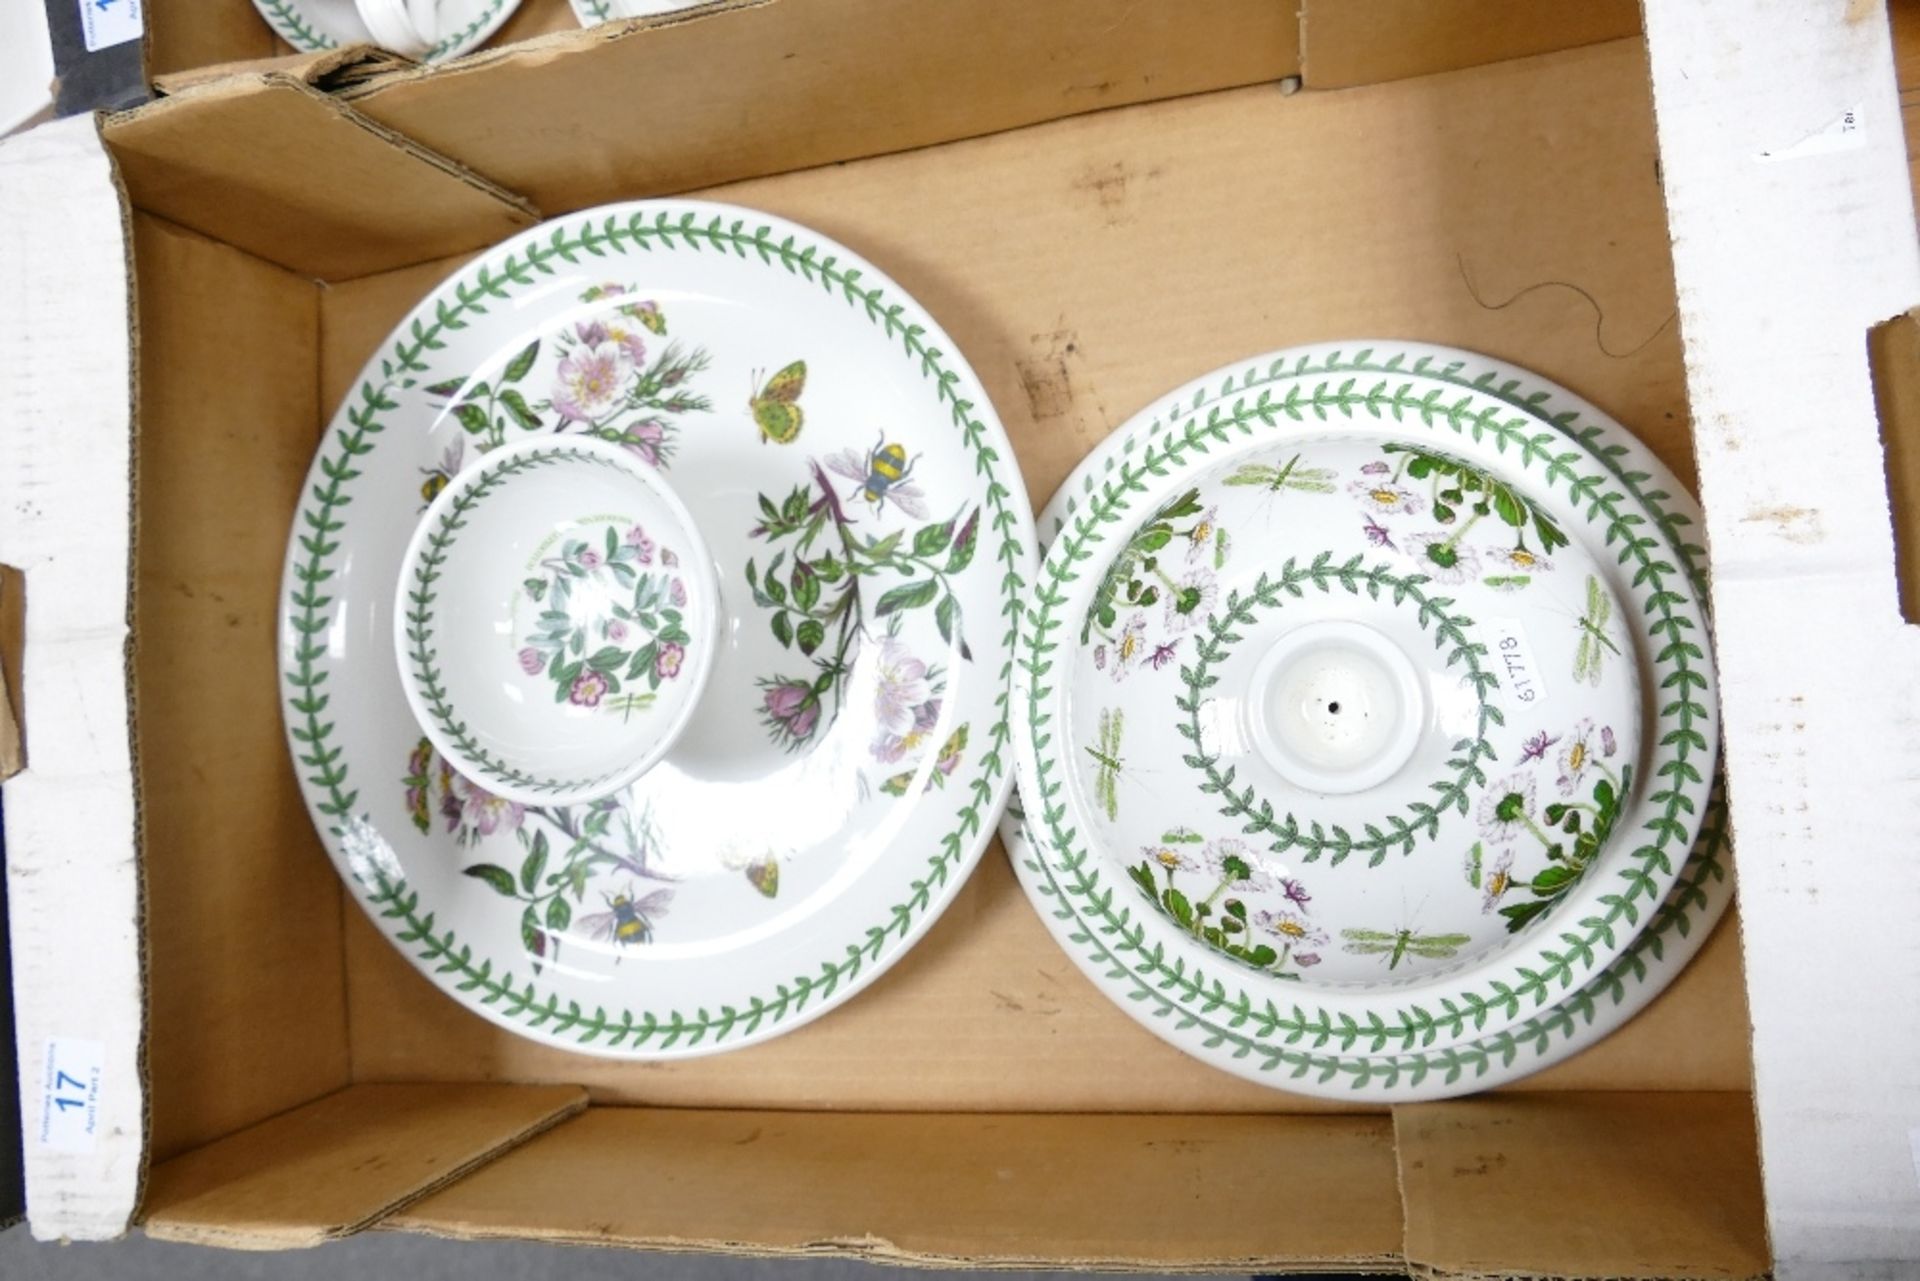 A collection of Portmeirion Botanic patterned items including large dip bowl & covered cheese dish